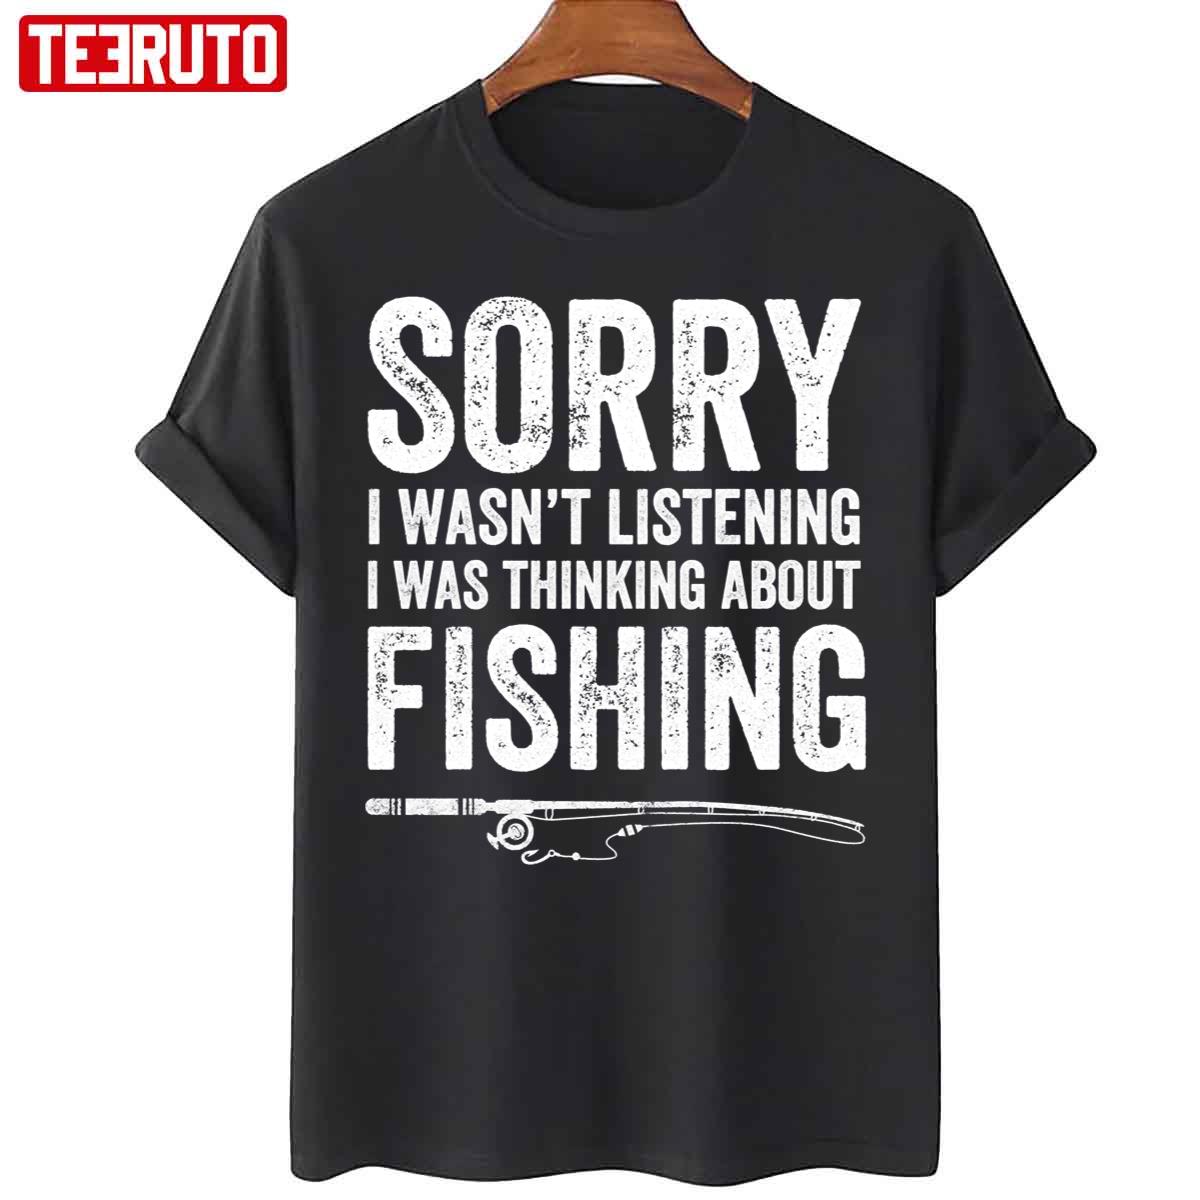 Sorry I Wasn’t Listening I Was Thinking About Fishing Funny Unisex T-Shirt